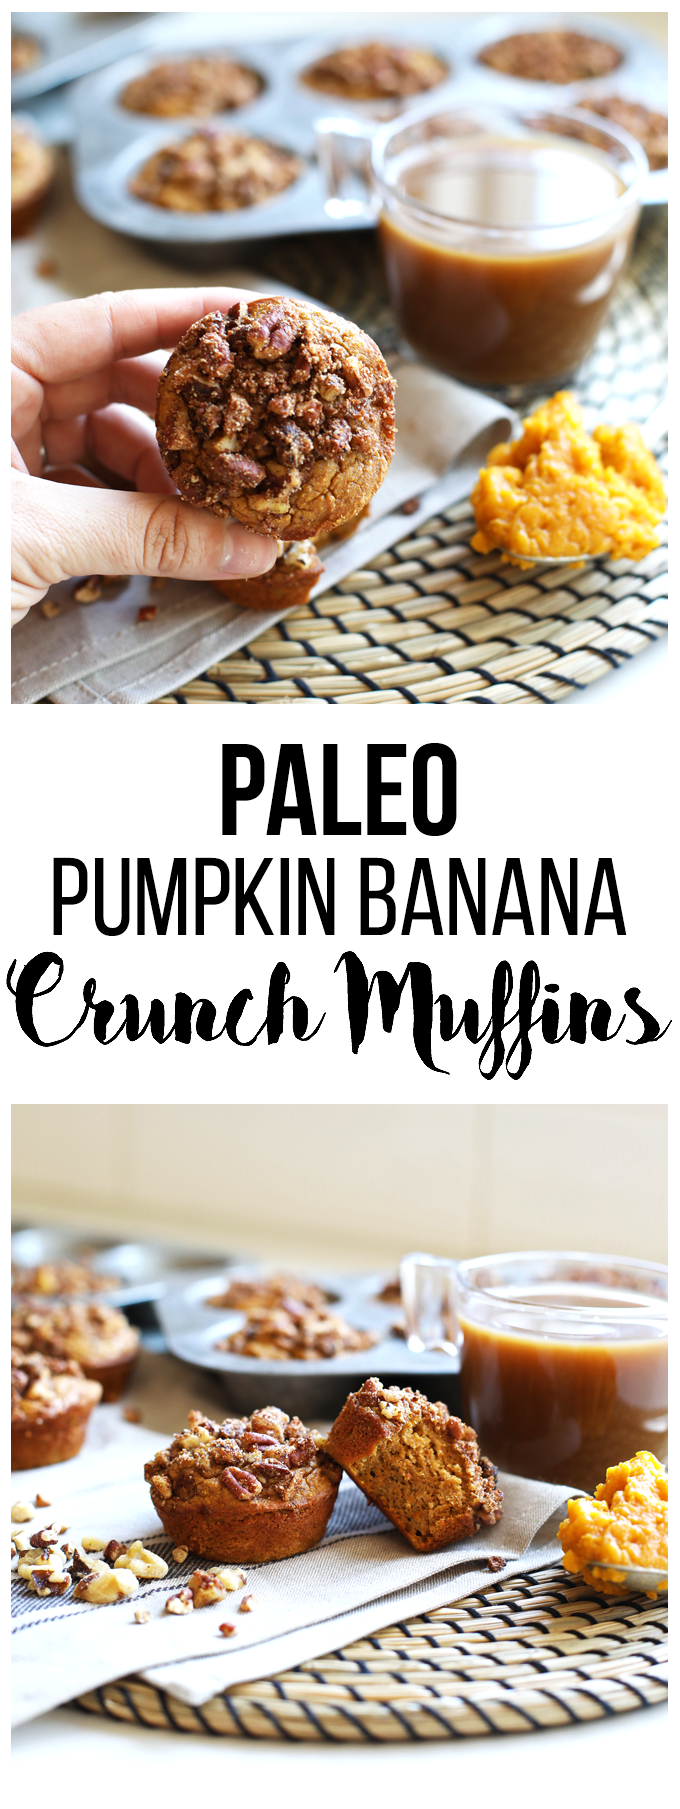 These Paleo Pumpkin Crunch Muffins are perfect for healthy holiday baking! 